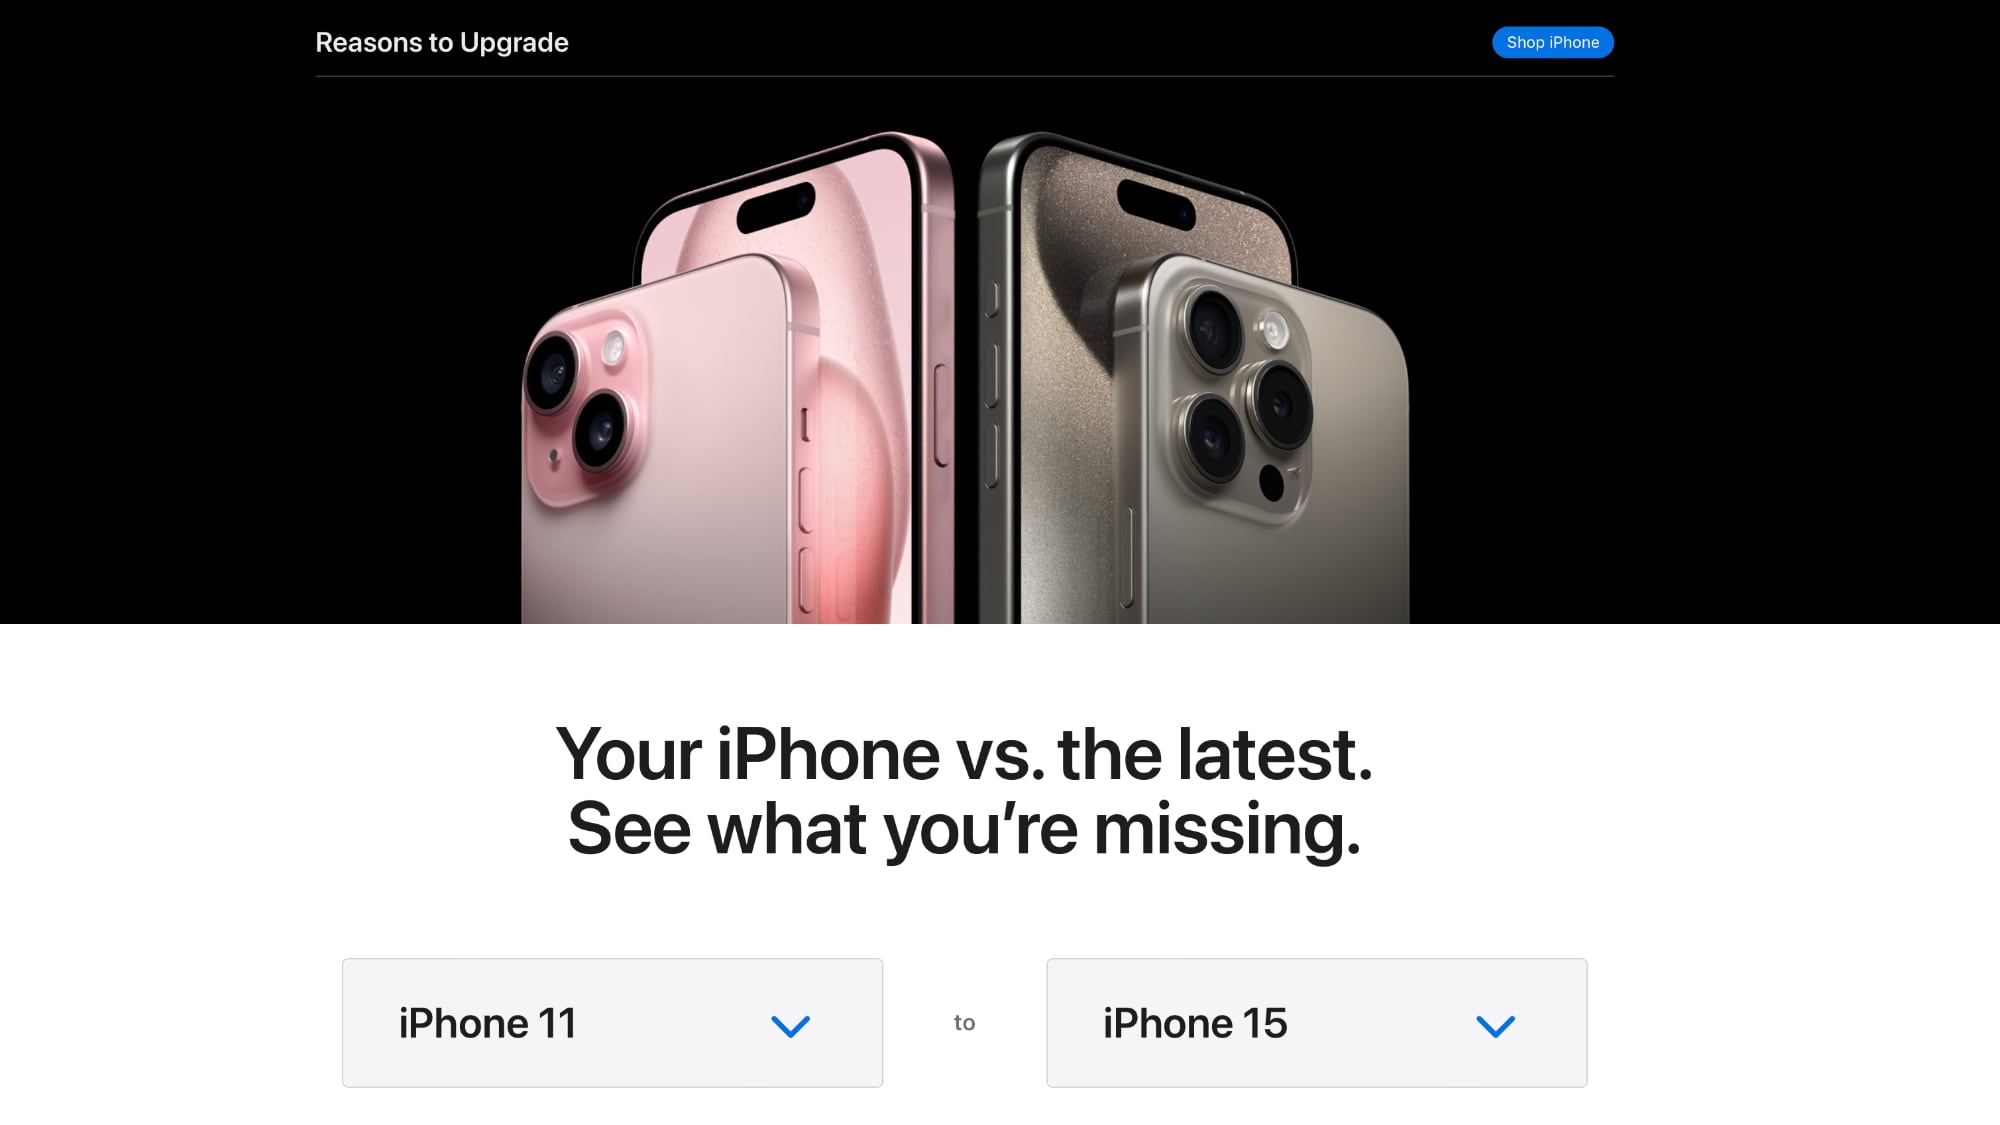 Apple Outlines 'Reasons to Upgrade' Your iPhone on New Website